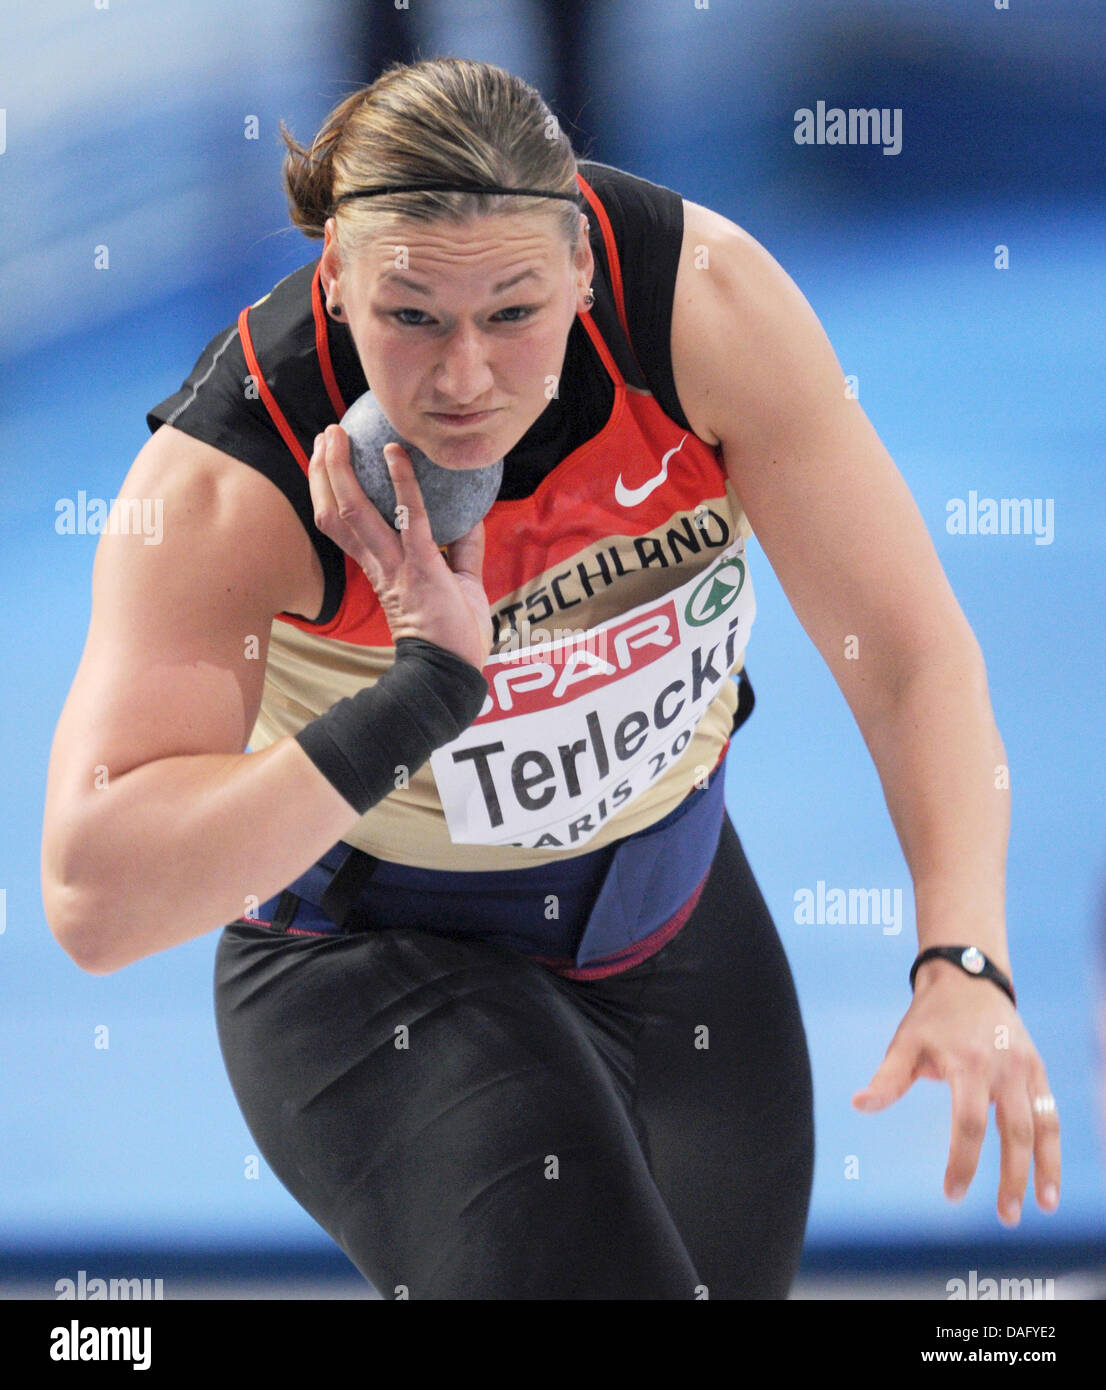 Germany's Josephine Terlecki competes in the shotput competition at the European Athletics Indoor Championships 2011 in Paris, France, 05 March 2011. Photo: Arne Dedert Stock Photo